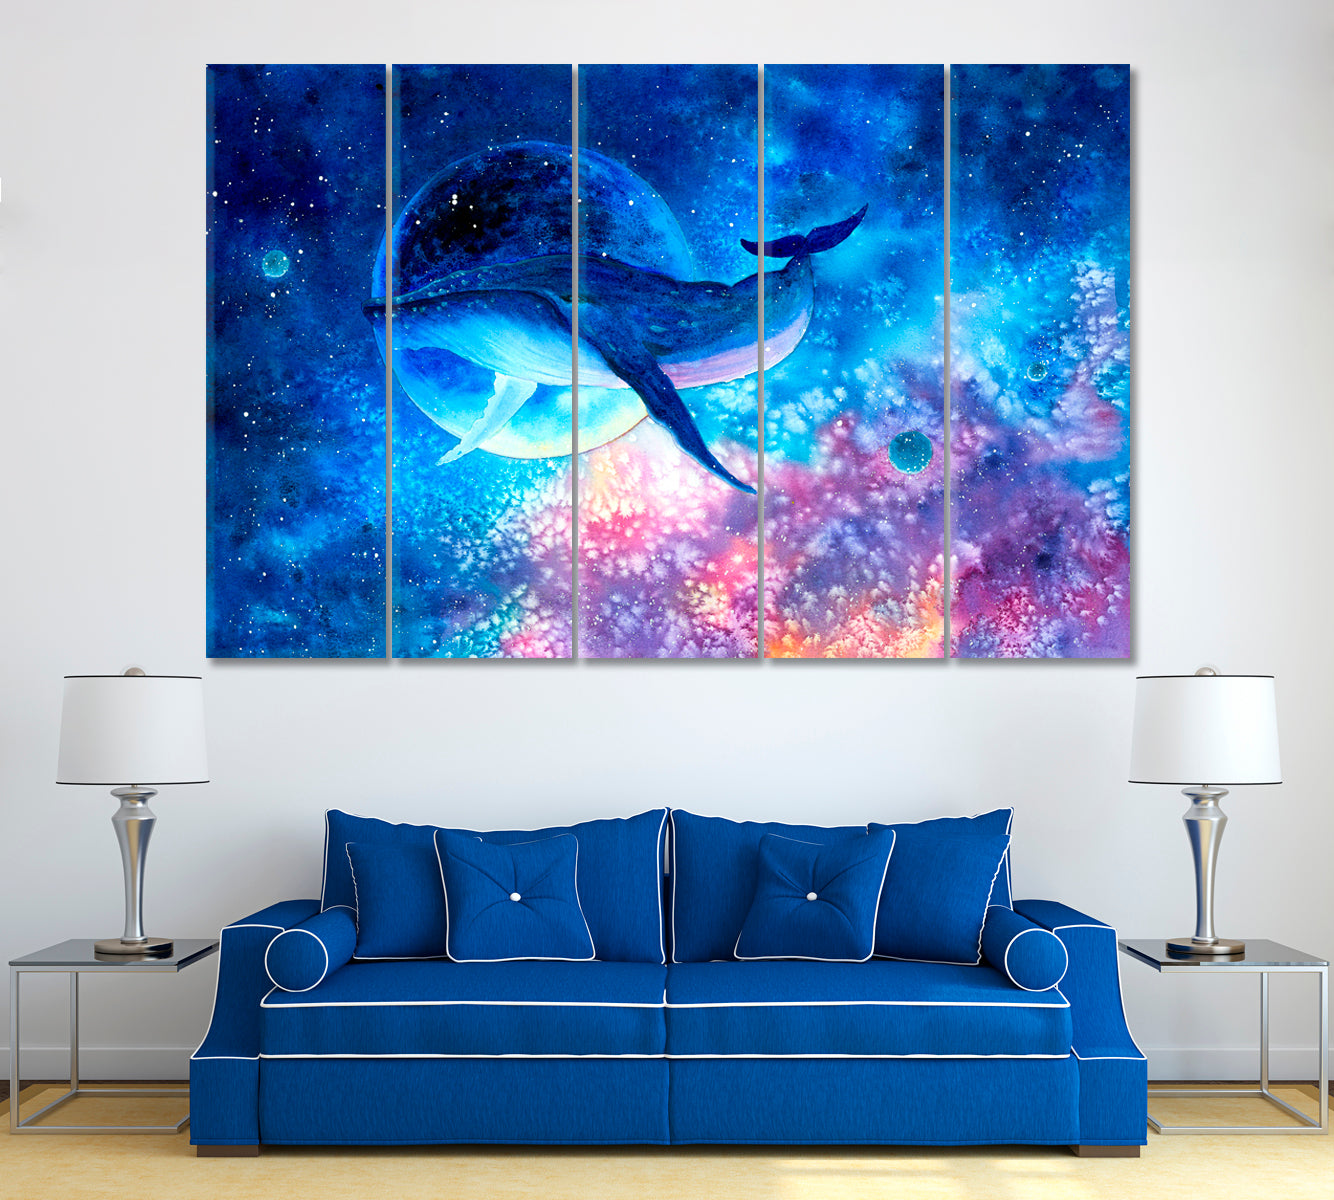 Whale in Space Canvas Print ArtLexy 5 Panels 36"x24" inches 